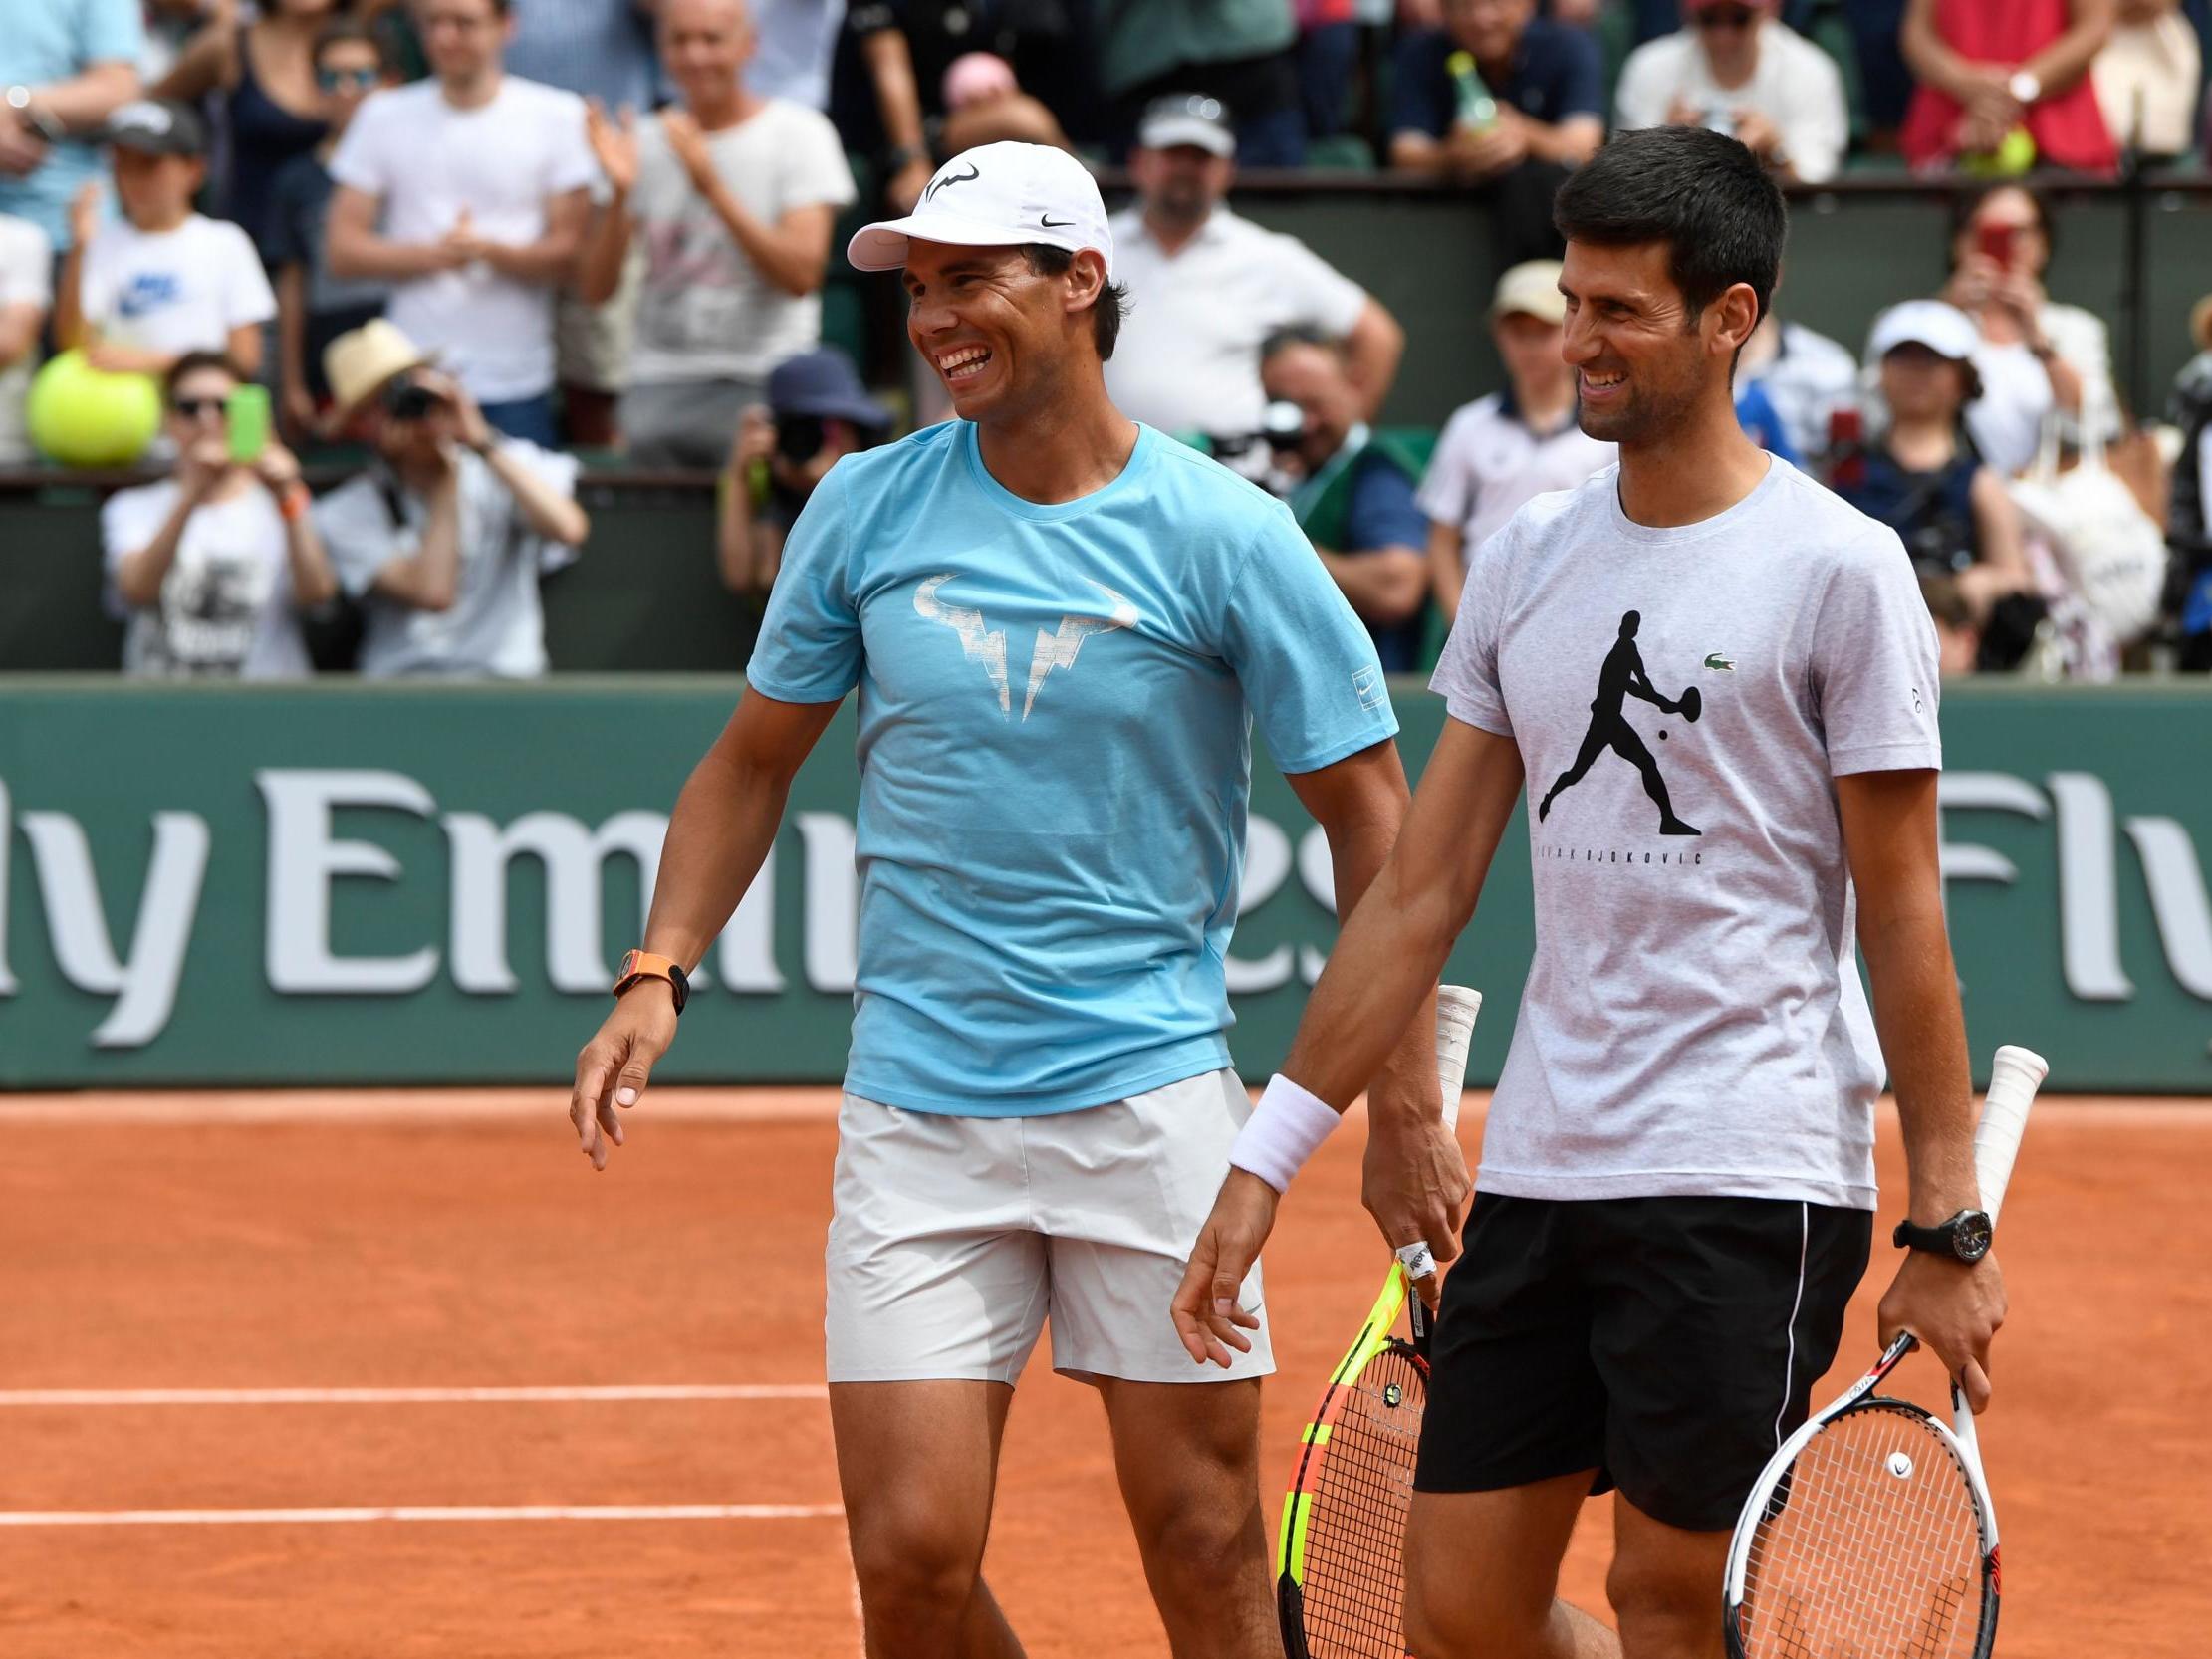 Nadal and Djokovic meet in the other men’s semi-final